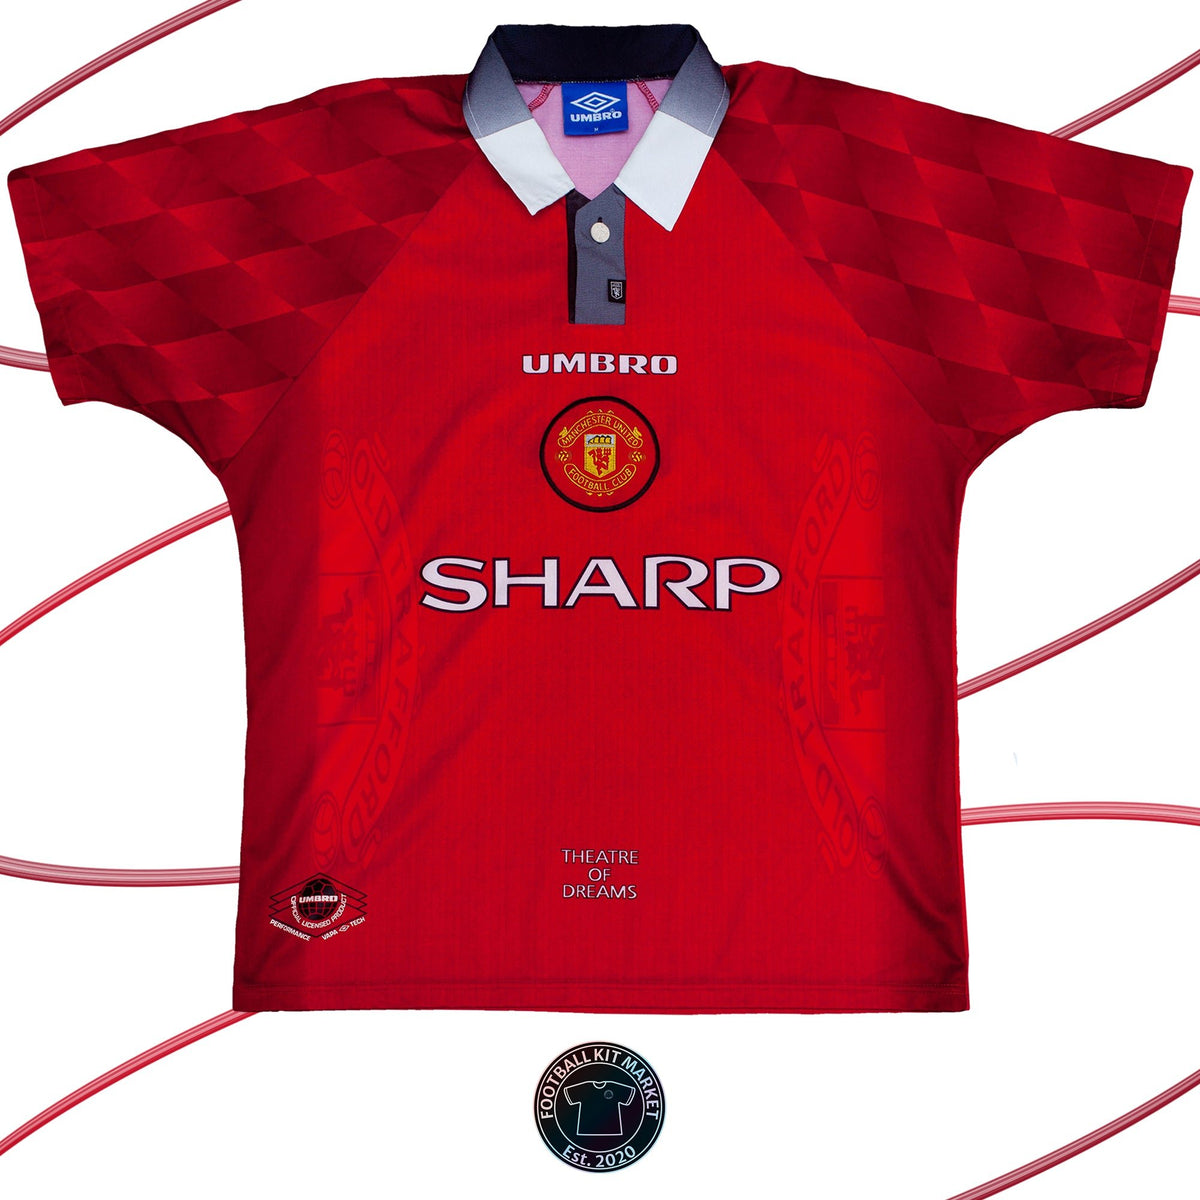 Genuine MANCHESTER UNITED Home Shirt (1996-1998) - UMBRO (M) - Product Image from Football Kit Market